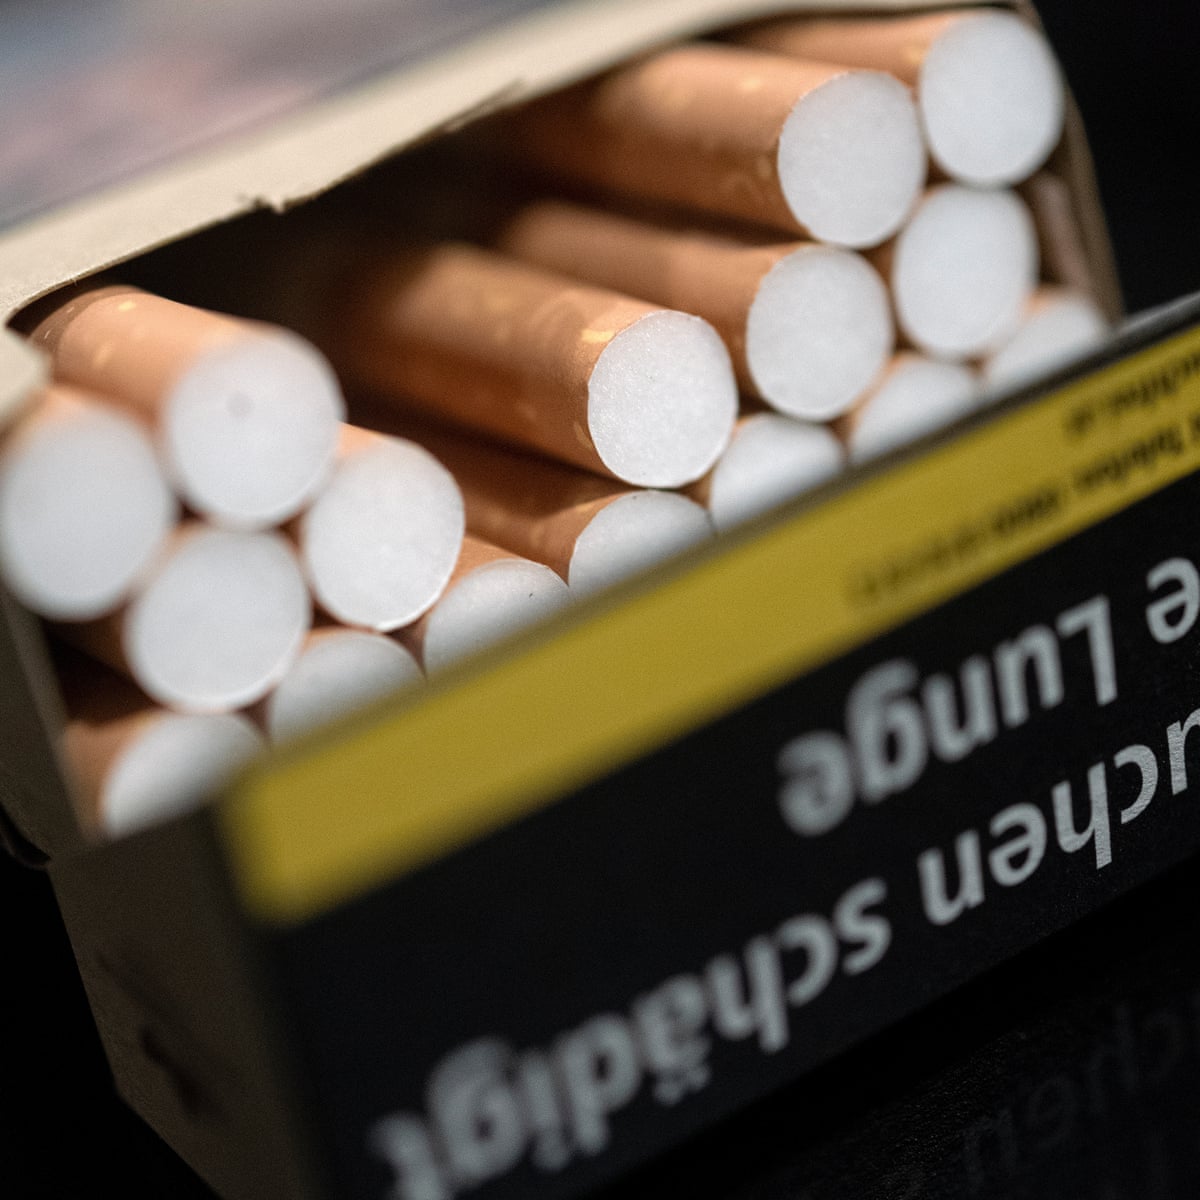 Outdated Eu Cigarette Tax Rules Blamed For Slow Drop In Smoking Smoking The Guardian These kinds of vapes are. outdated eu cigarette tax rules blamed